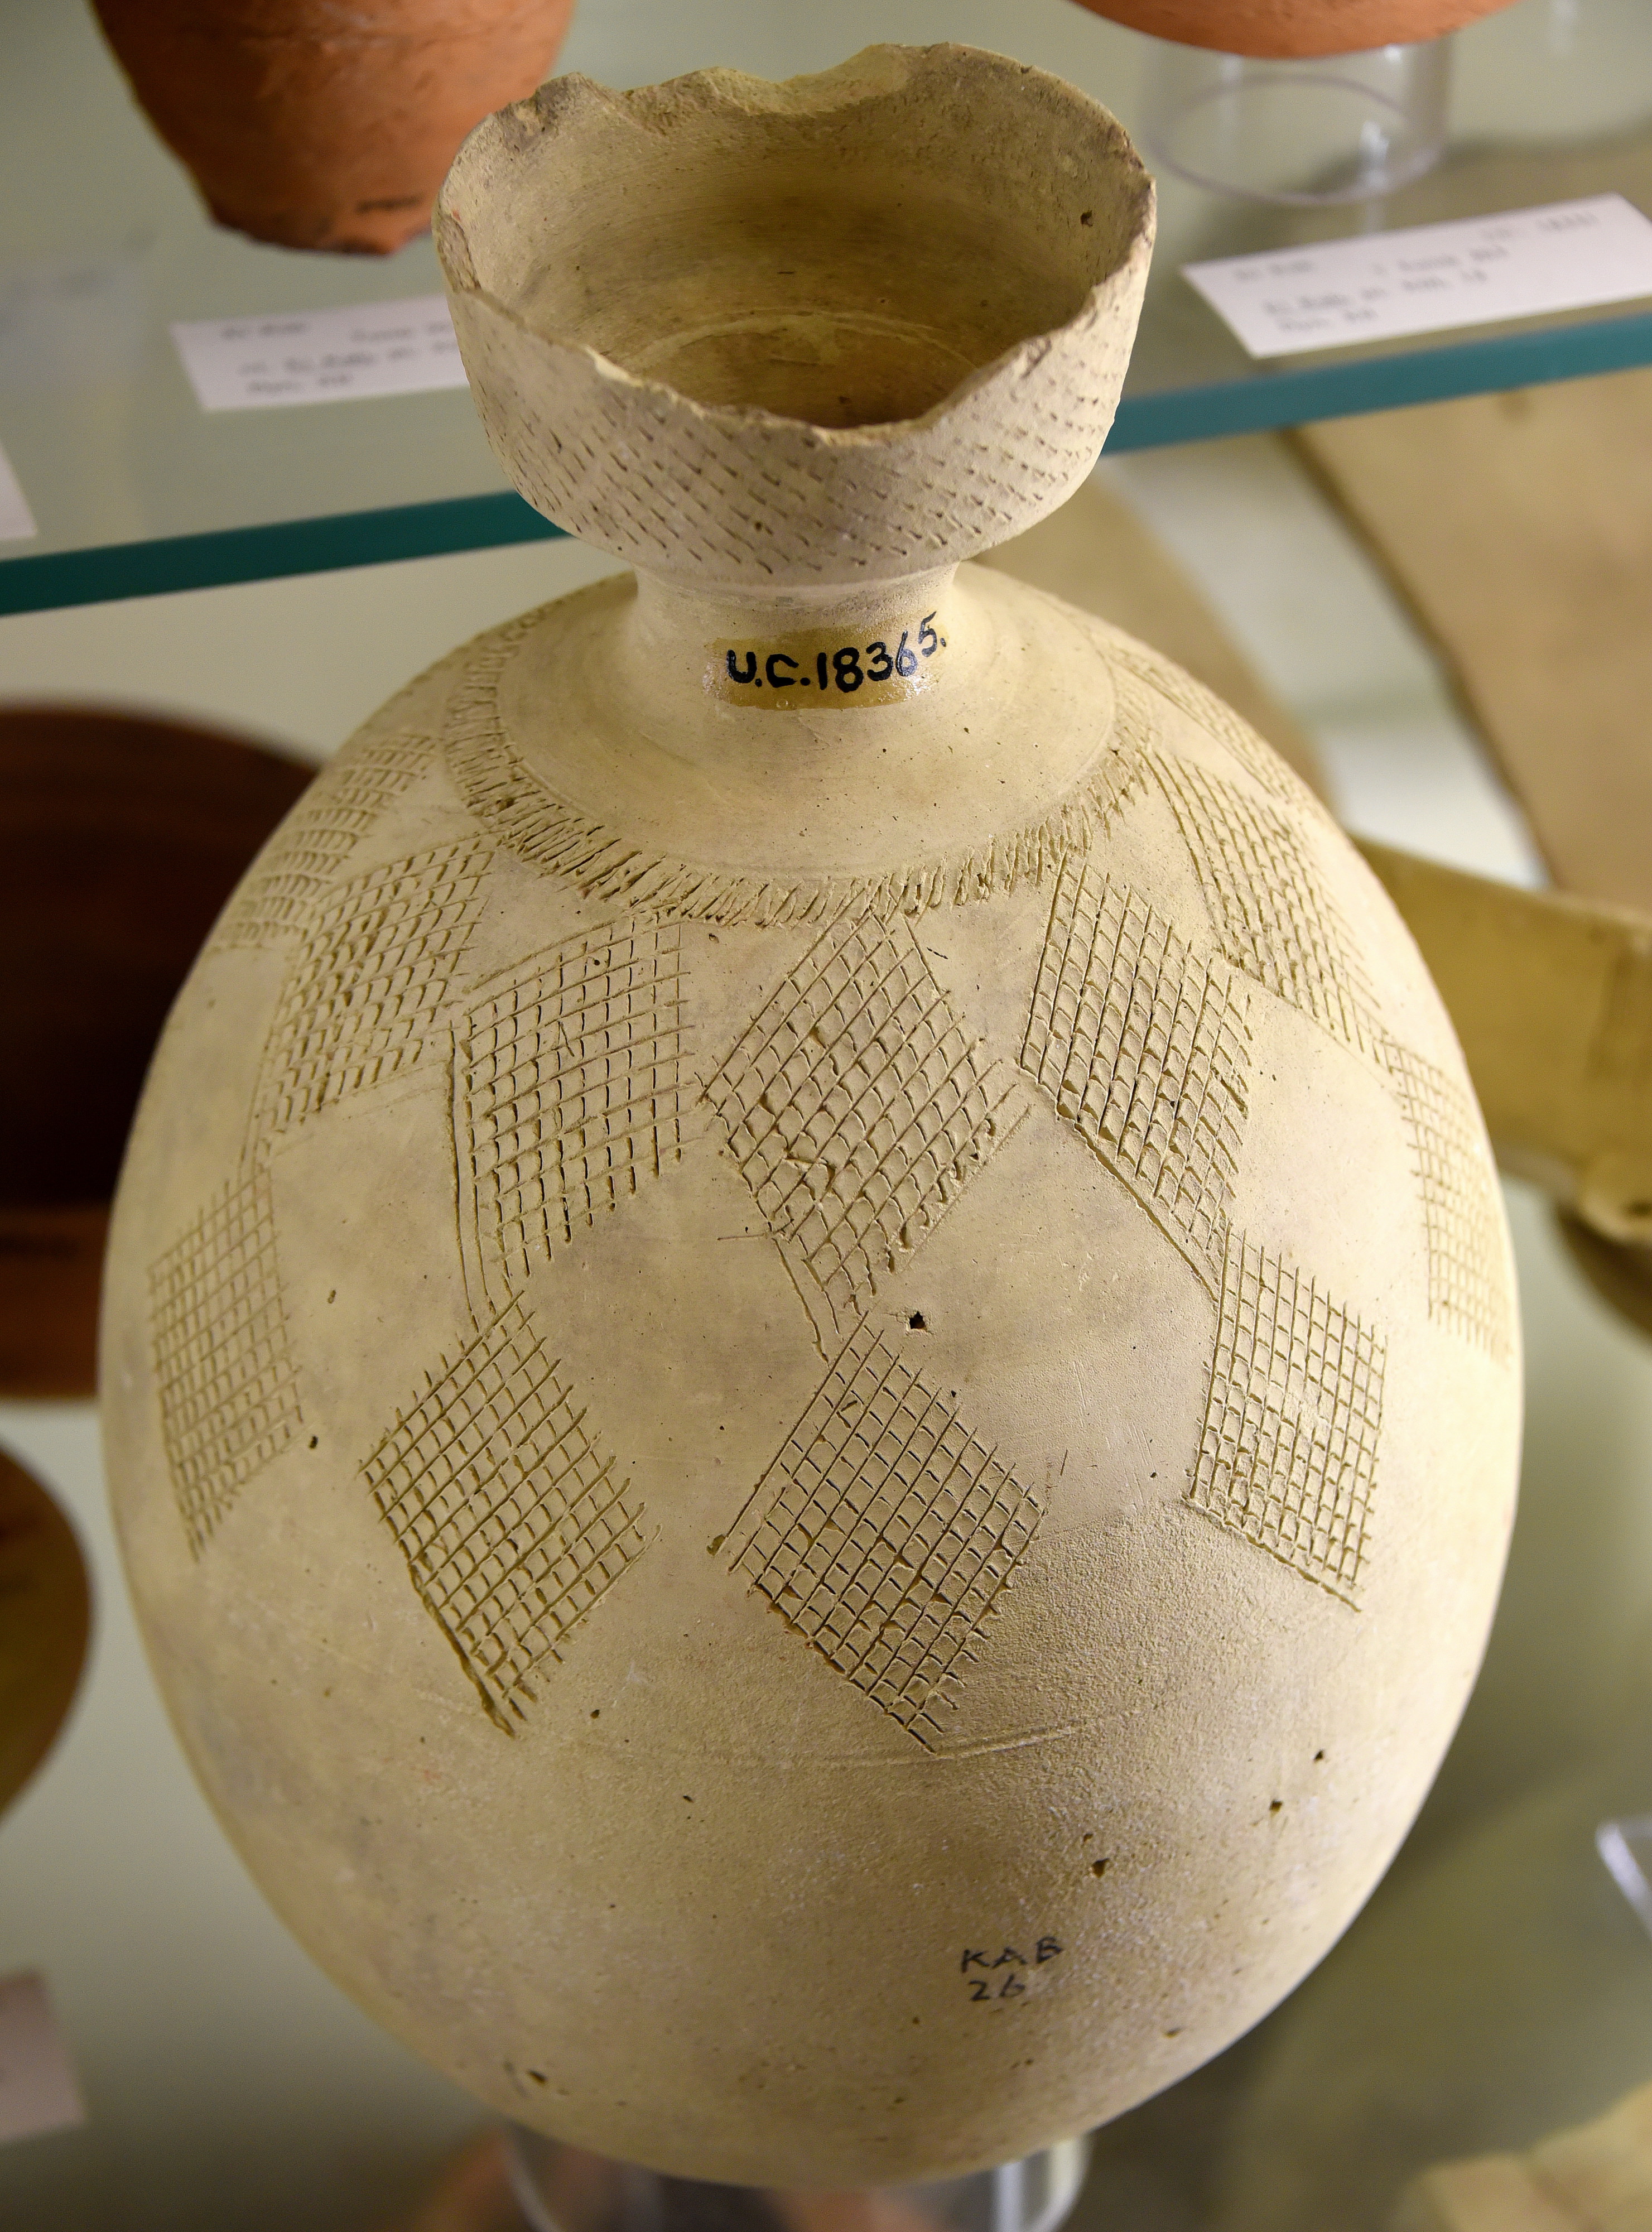 Pottery in Antiquity - World History Encyclopedia